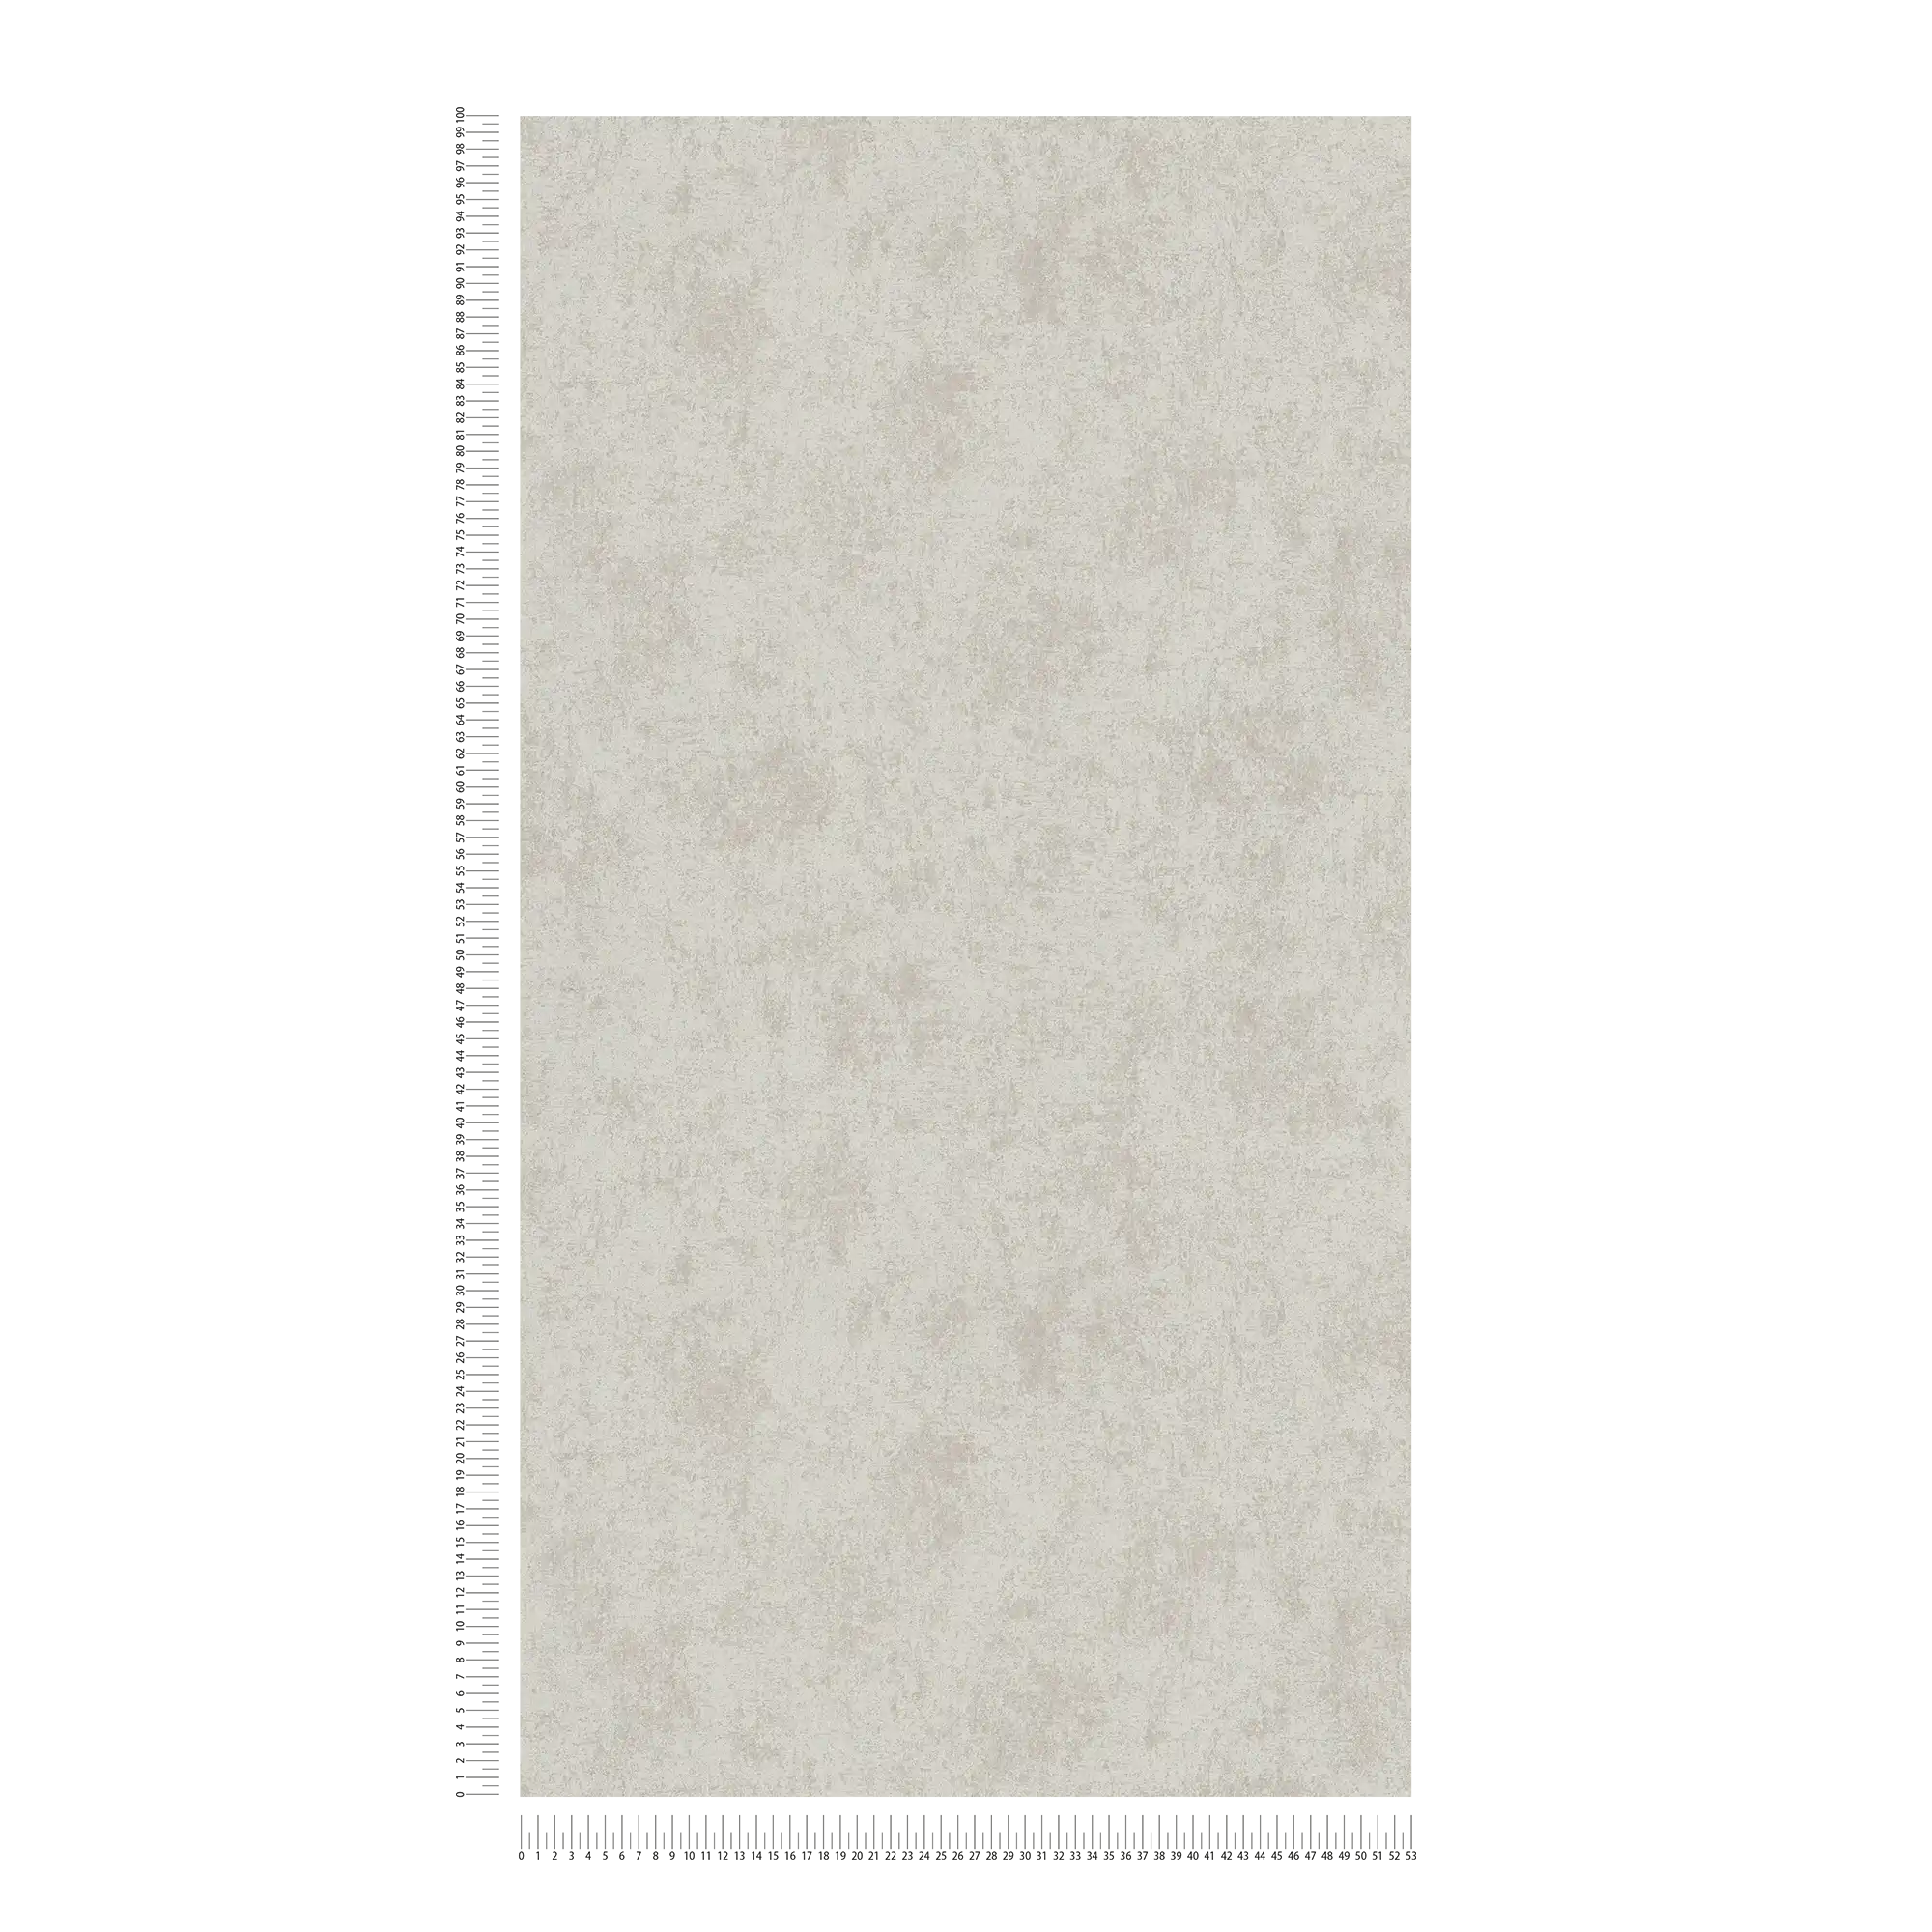             Wallpaper with glossy effect in metal look smooth - silver, grey, metallic
        